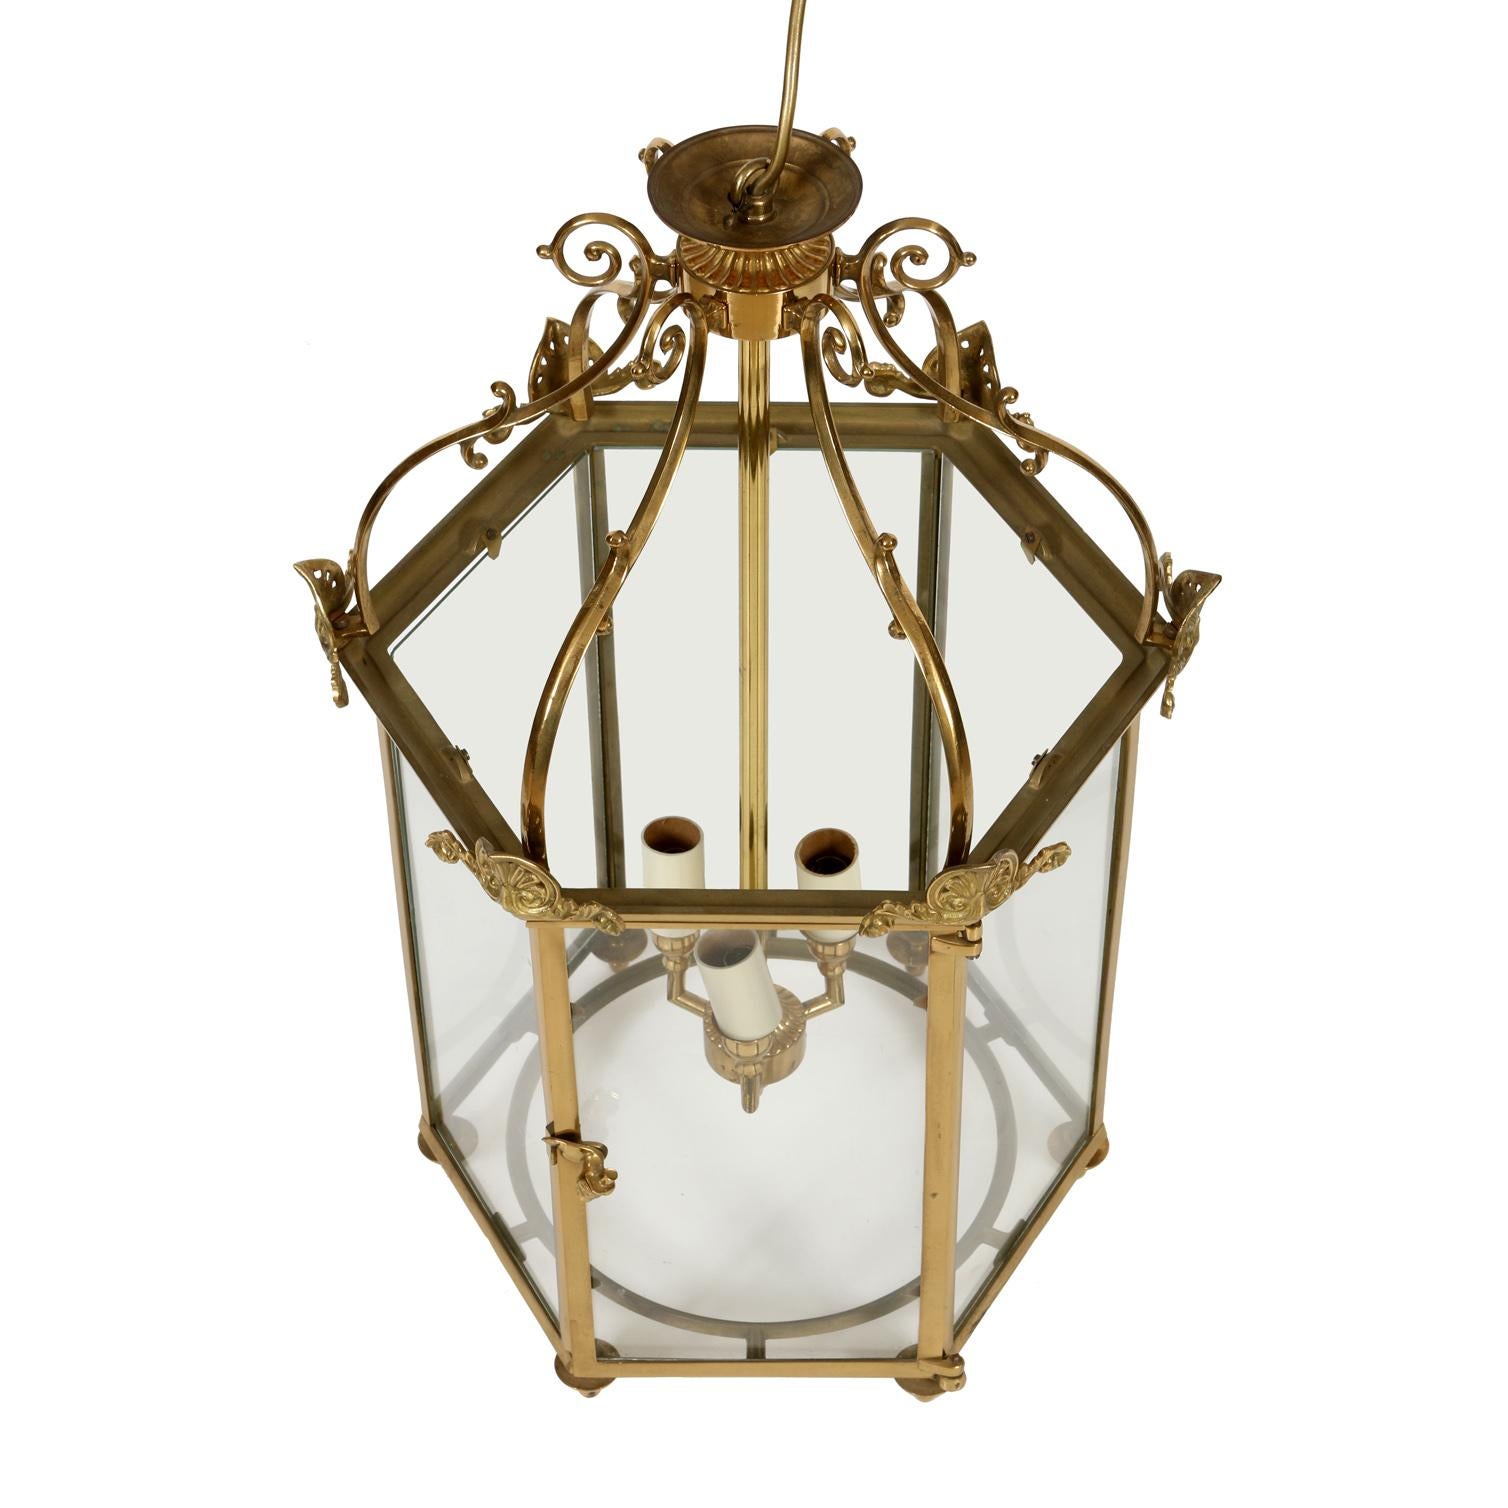 English brass vintage hall lantern in hexagonal shape with small palm details above and finials below with three lights.